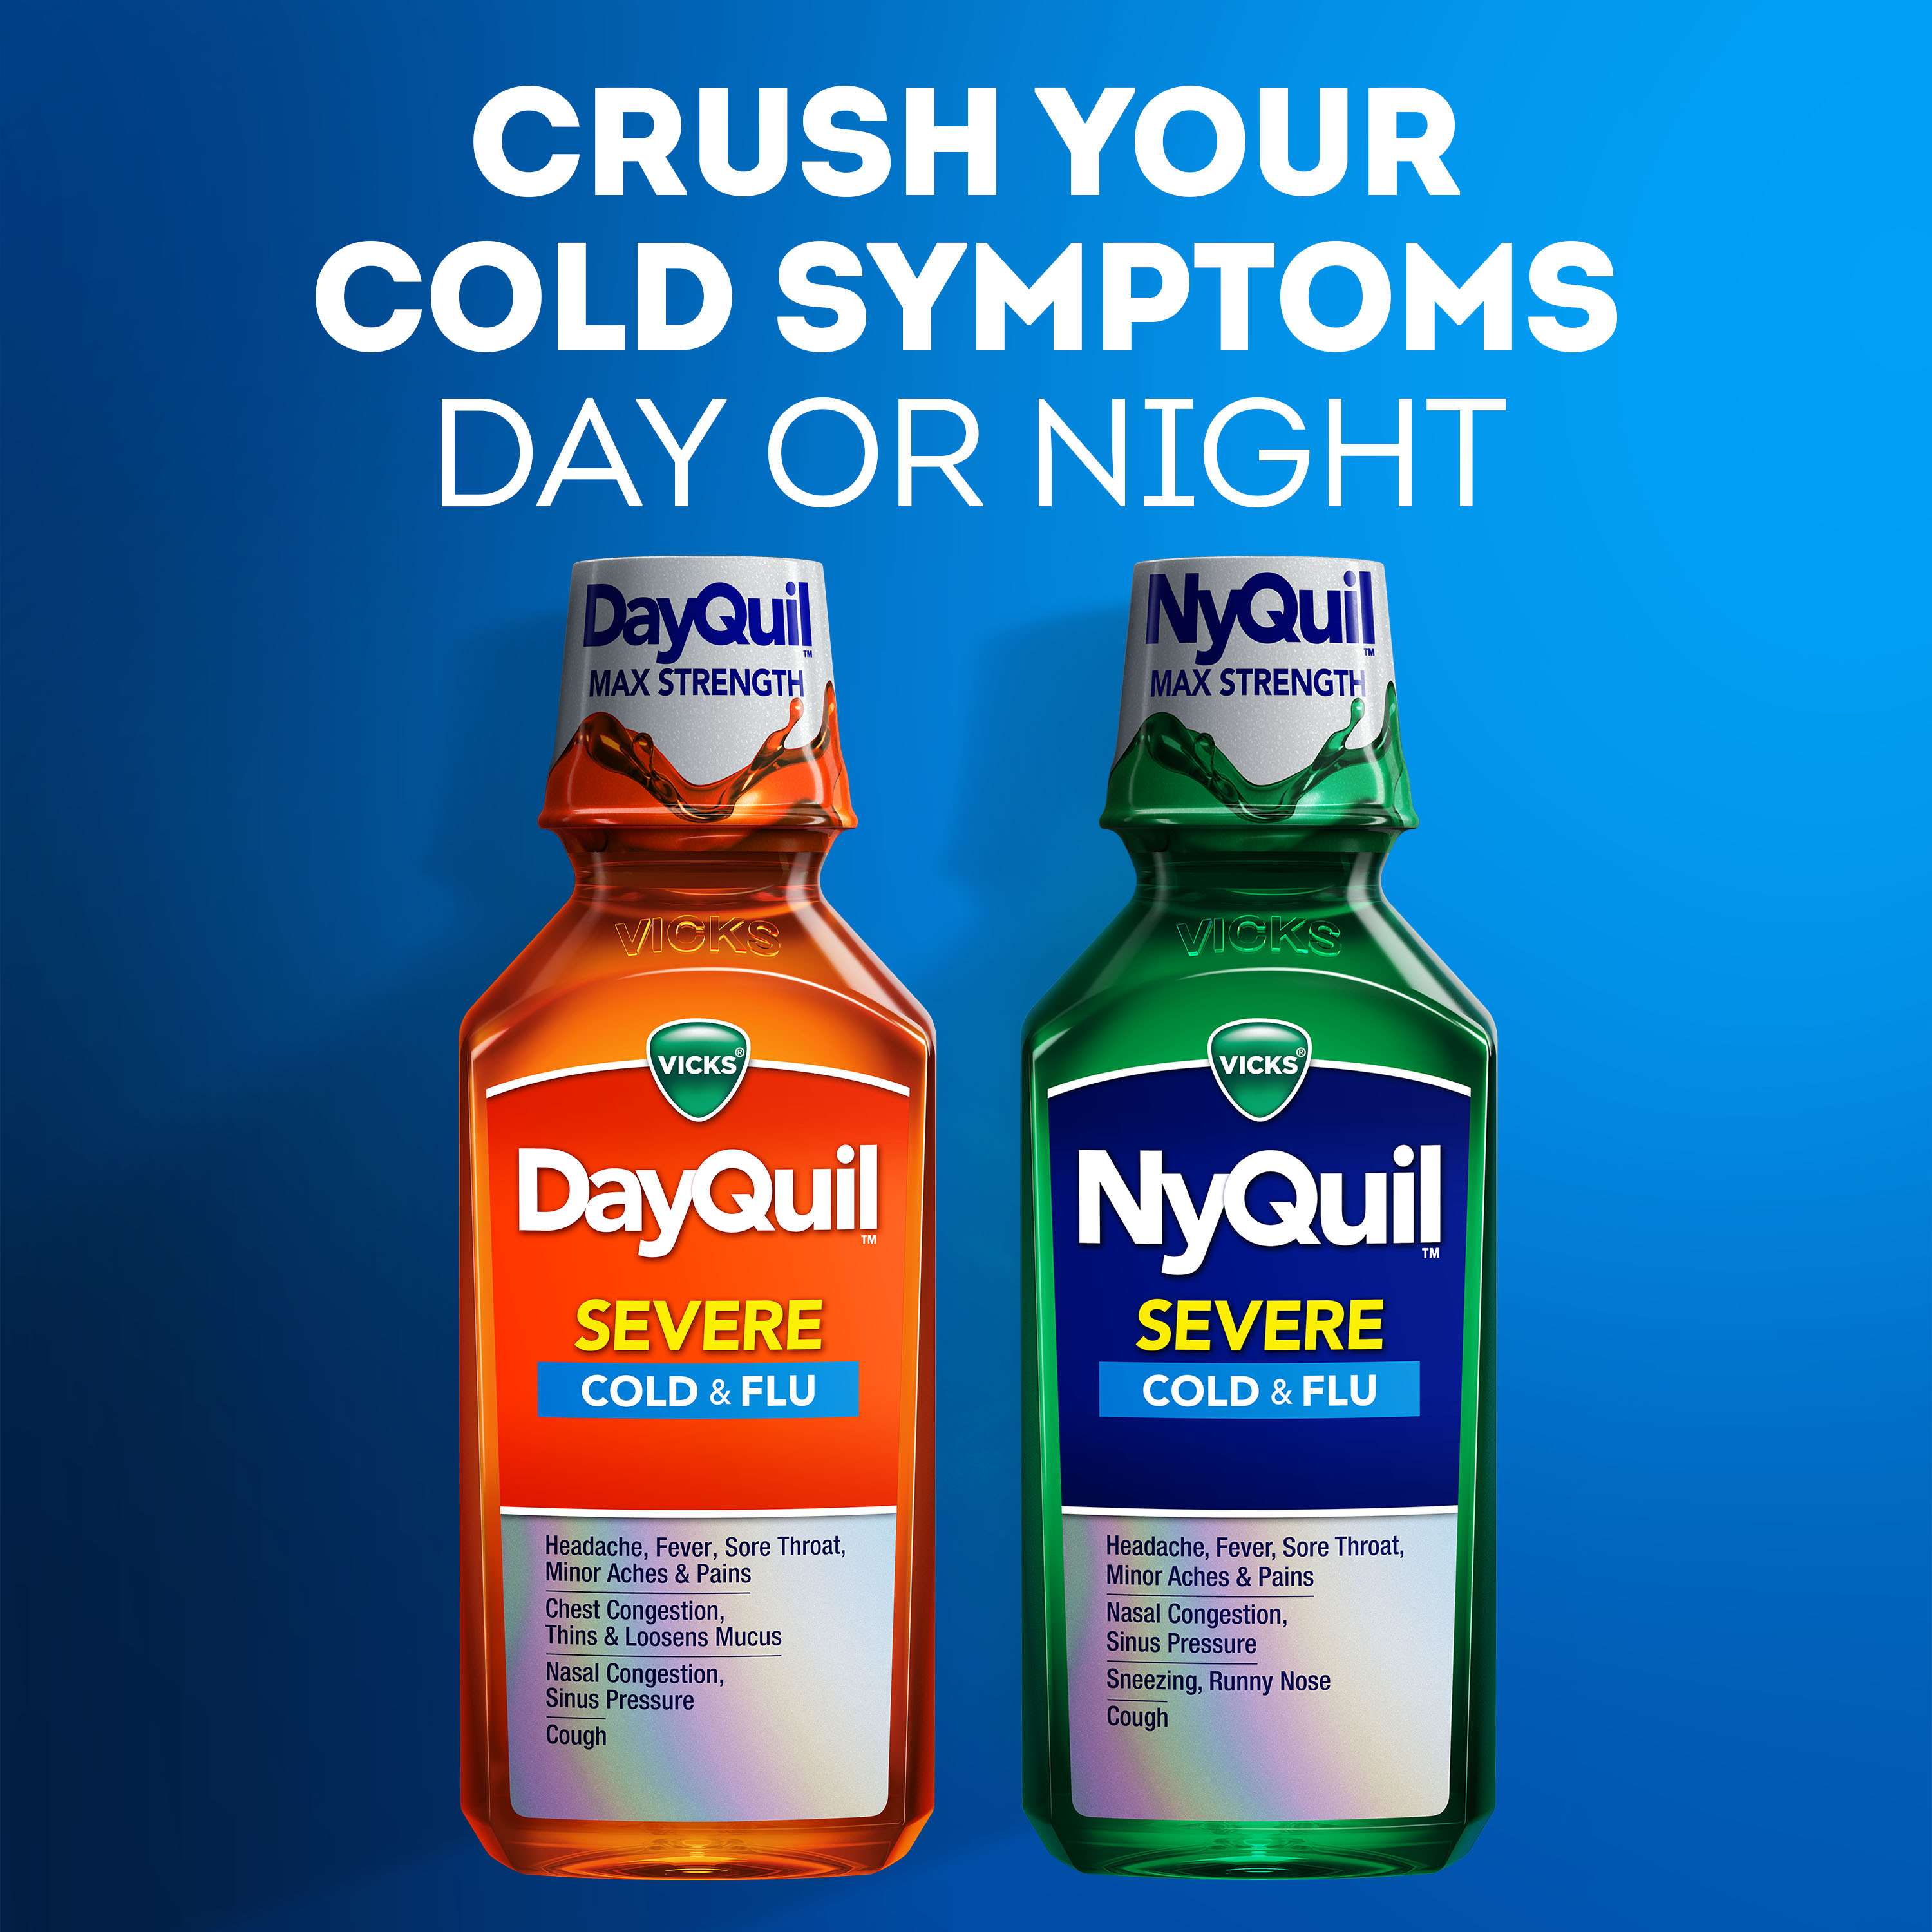 Crush your cold symptoms day or night